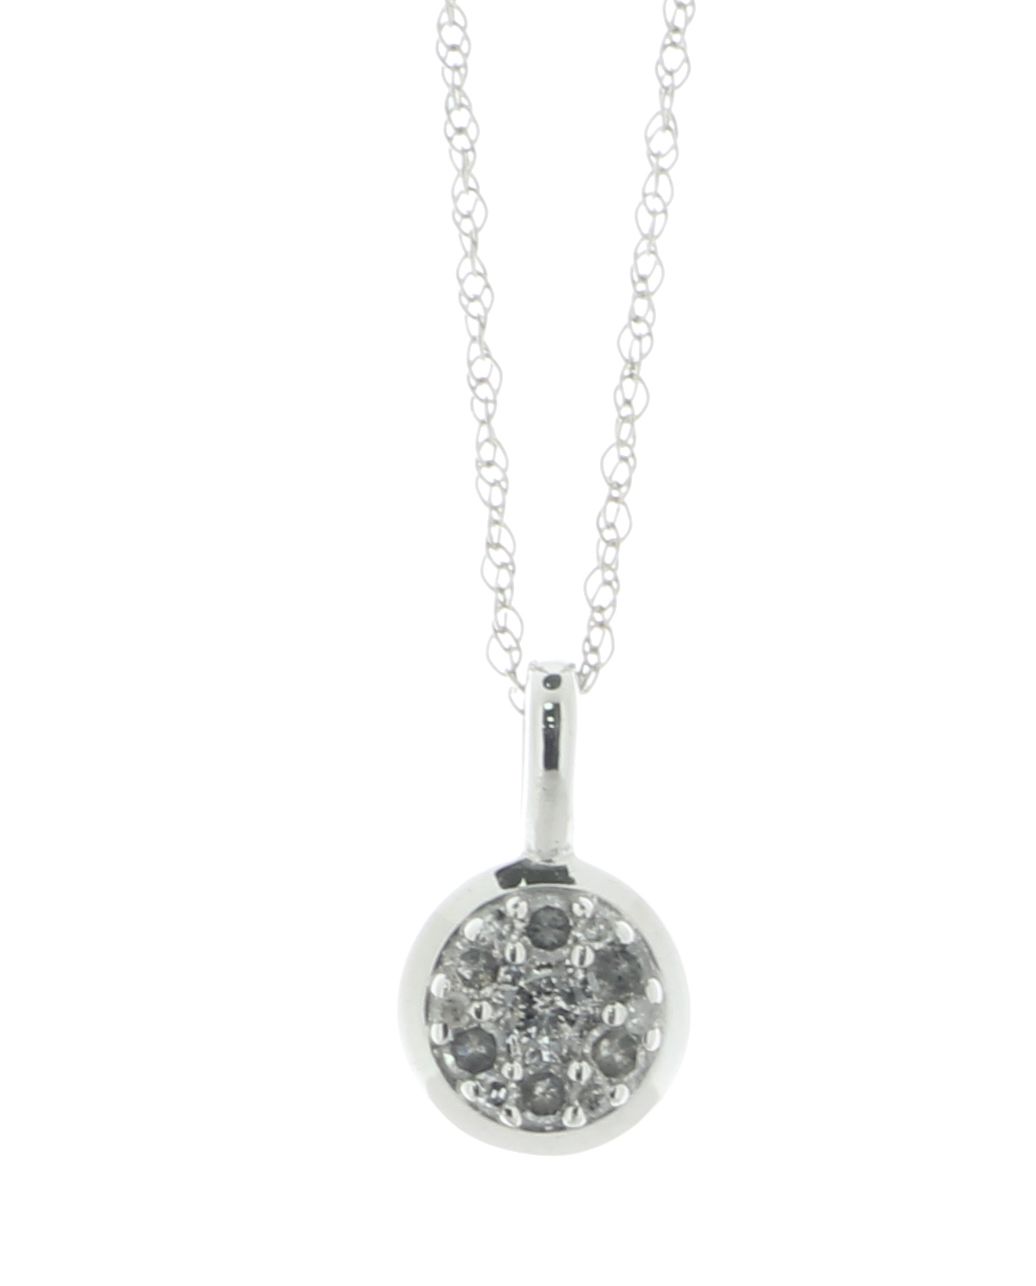 9ct White Gold Round Cluster Diamond Pendant and Chain 0.16 Carats - Image 2 of 4